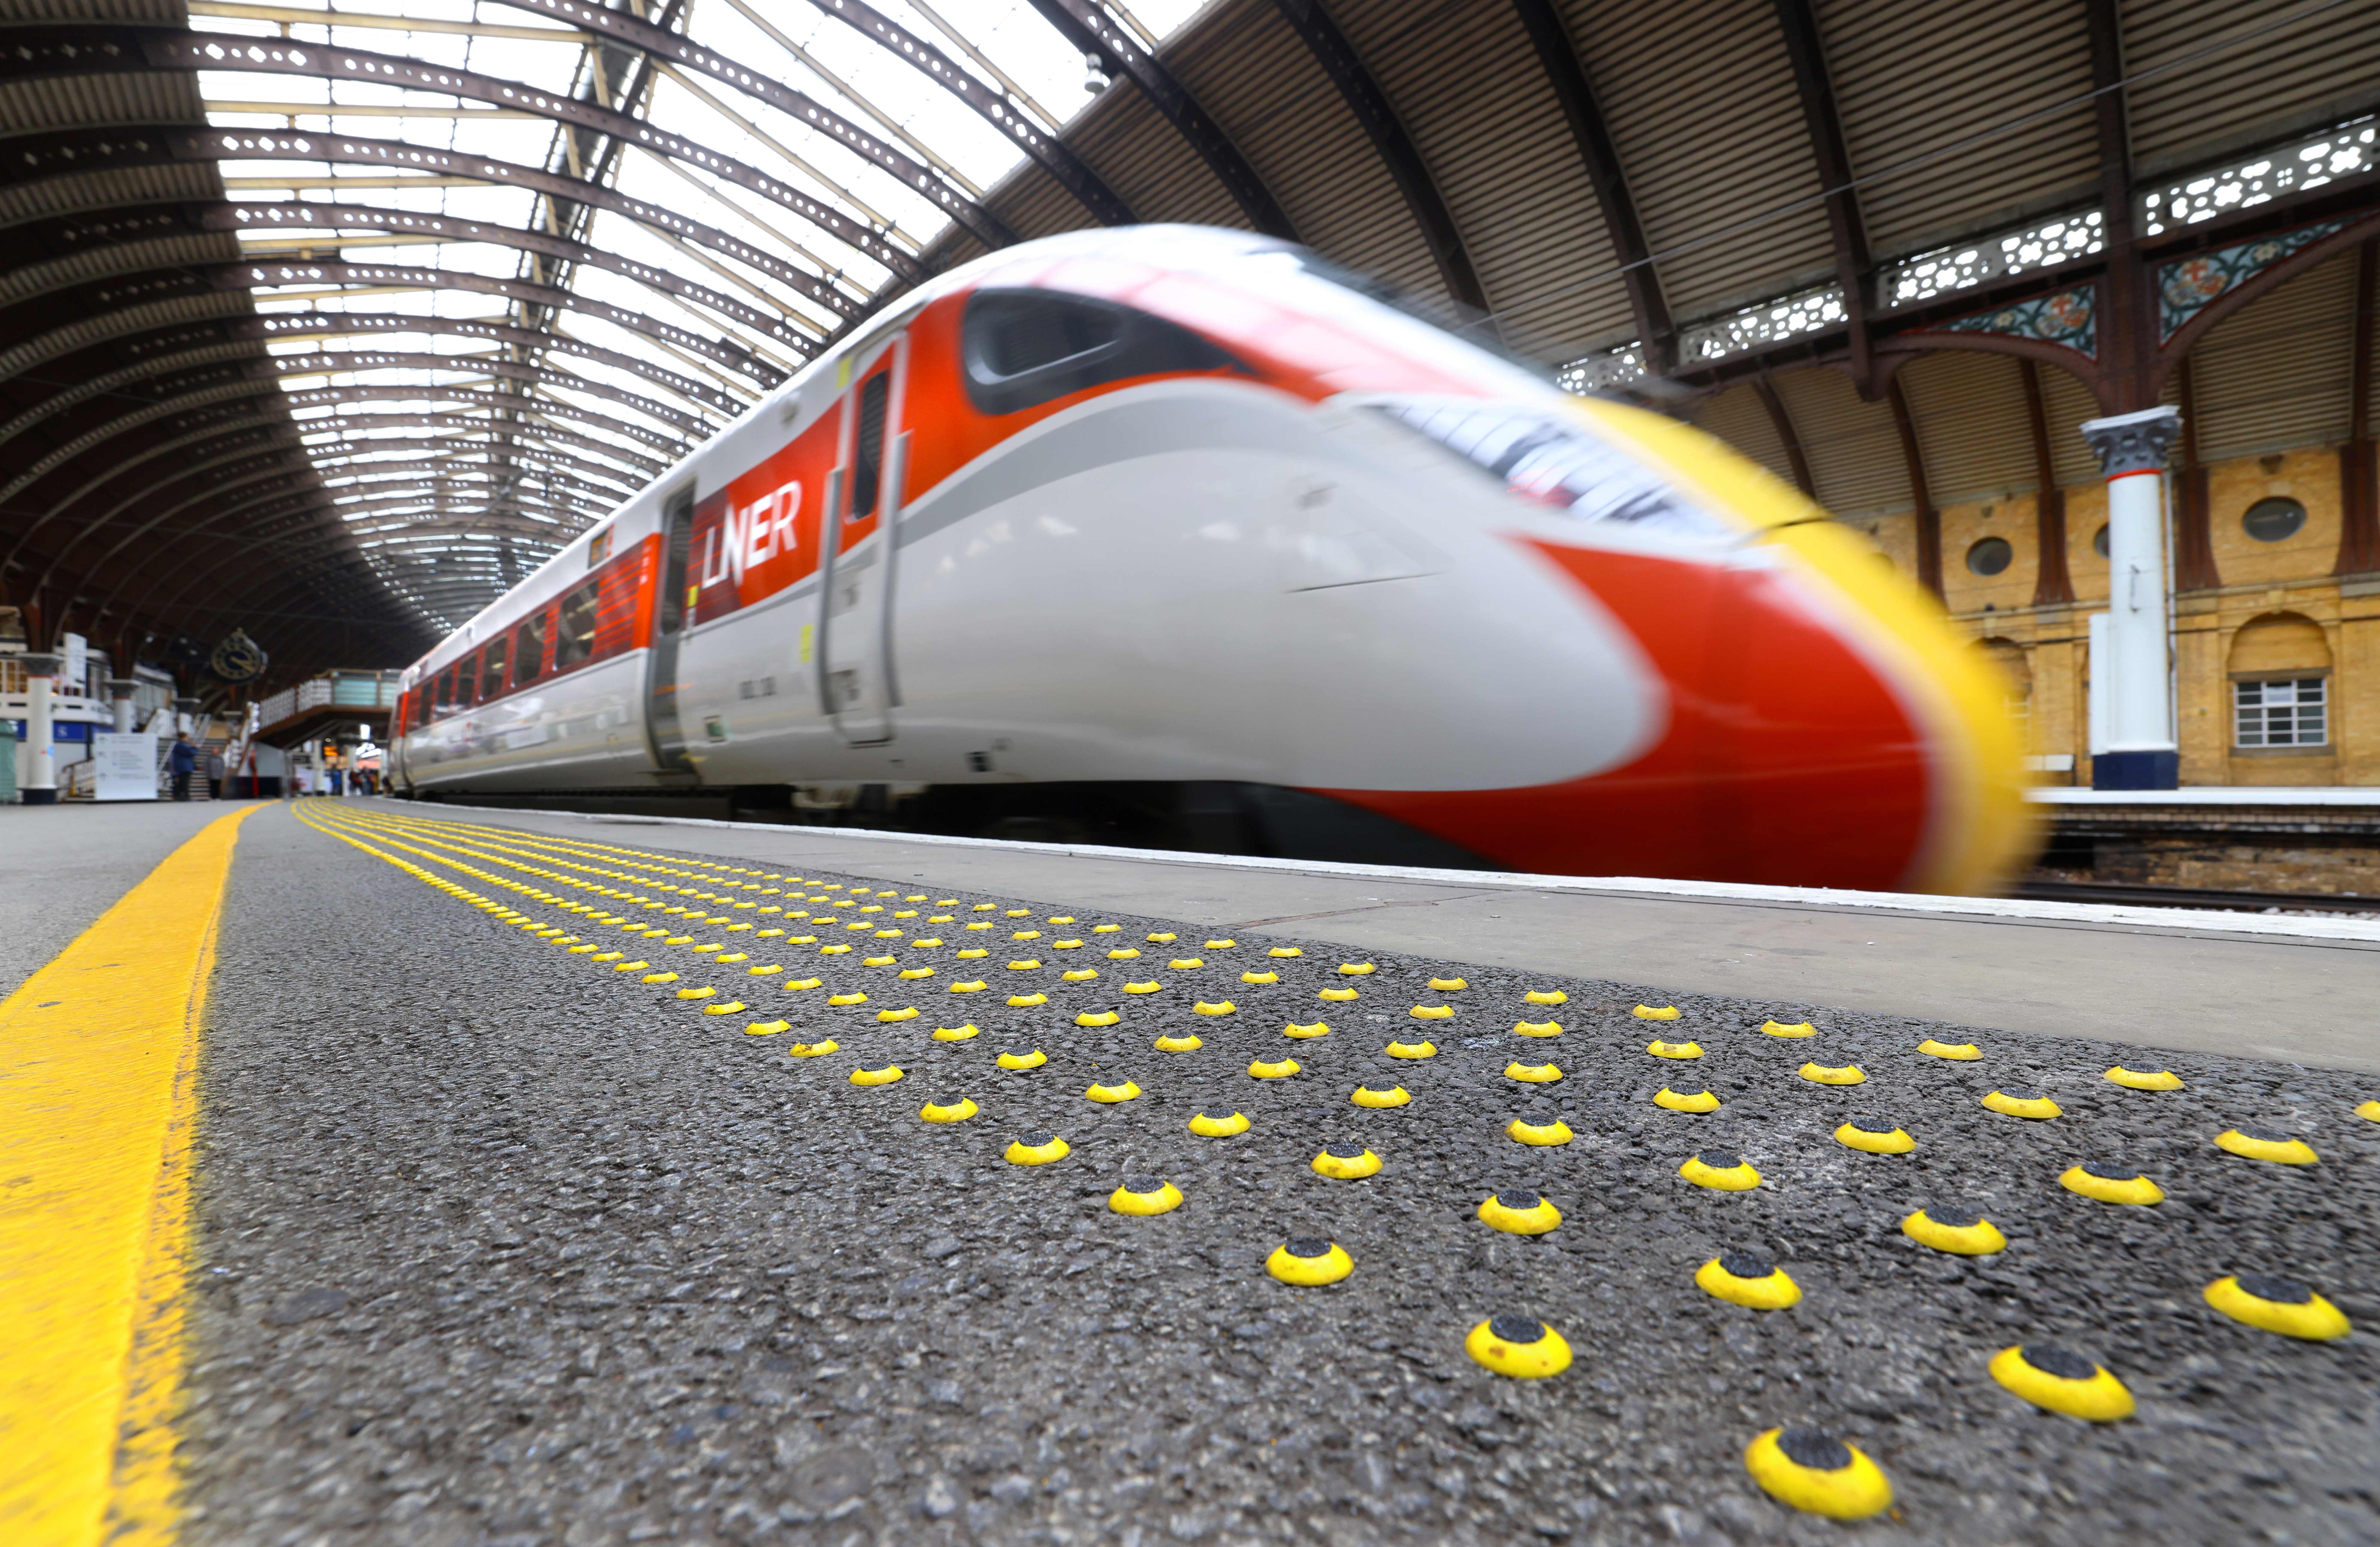 LNER Project Sees 600,000 Studs Installed On Platforms Across Its Network